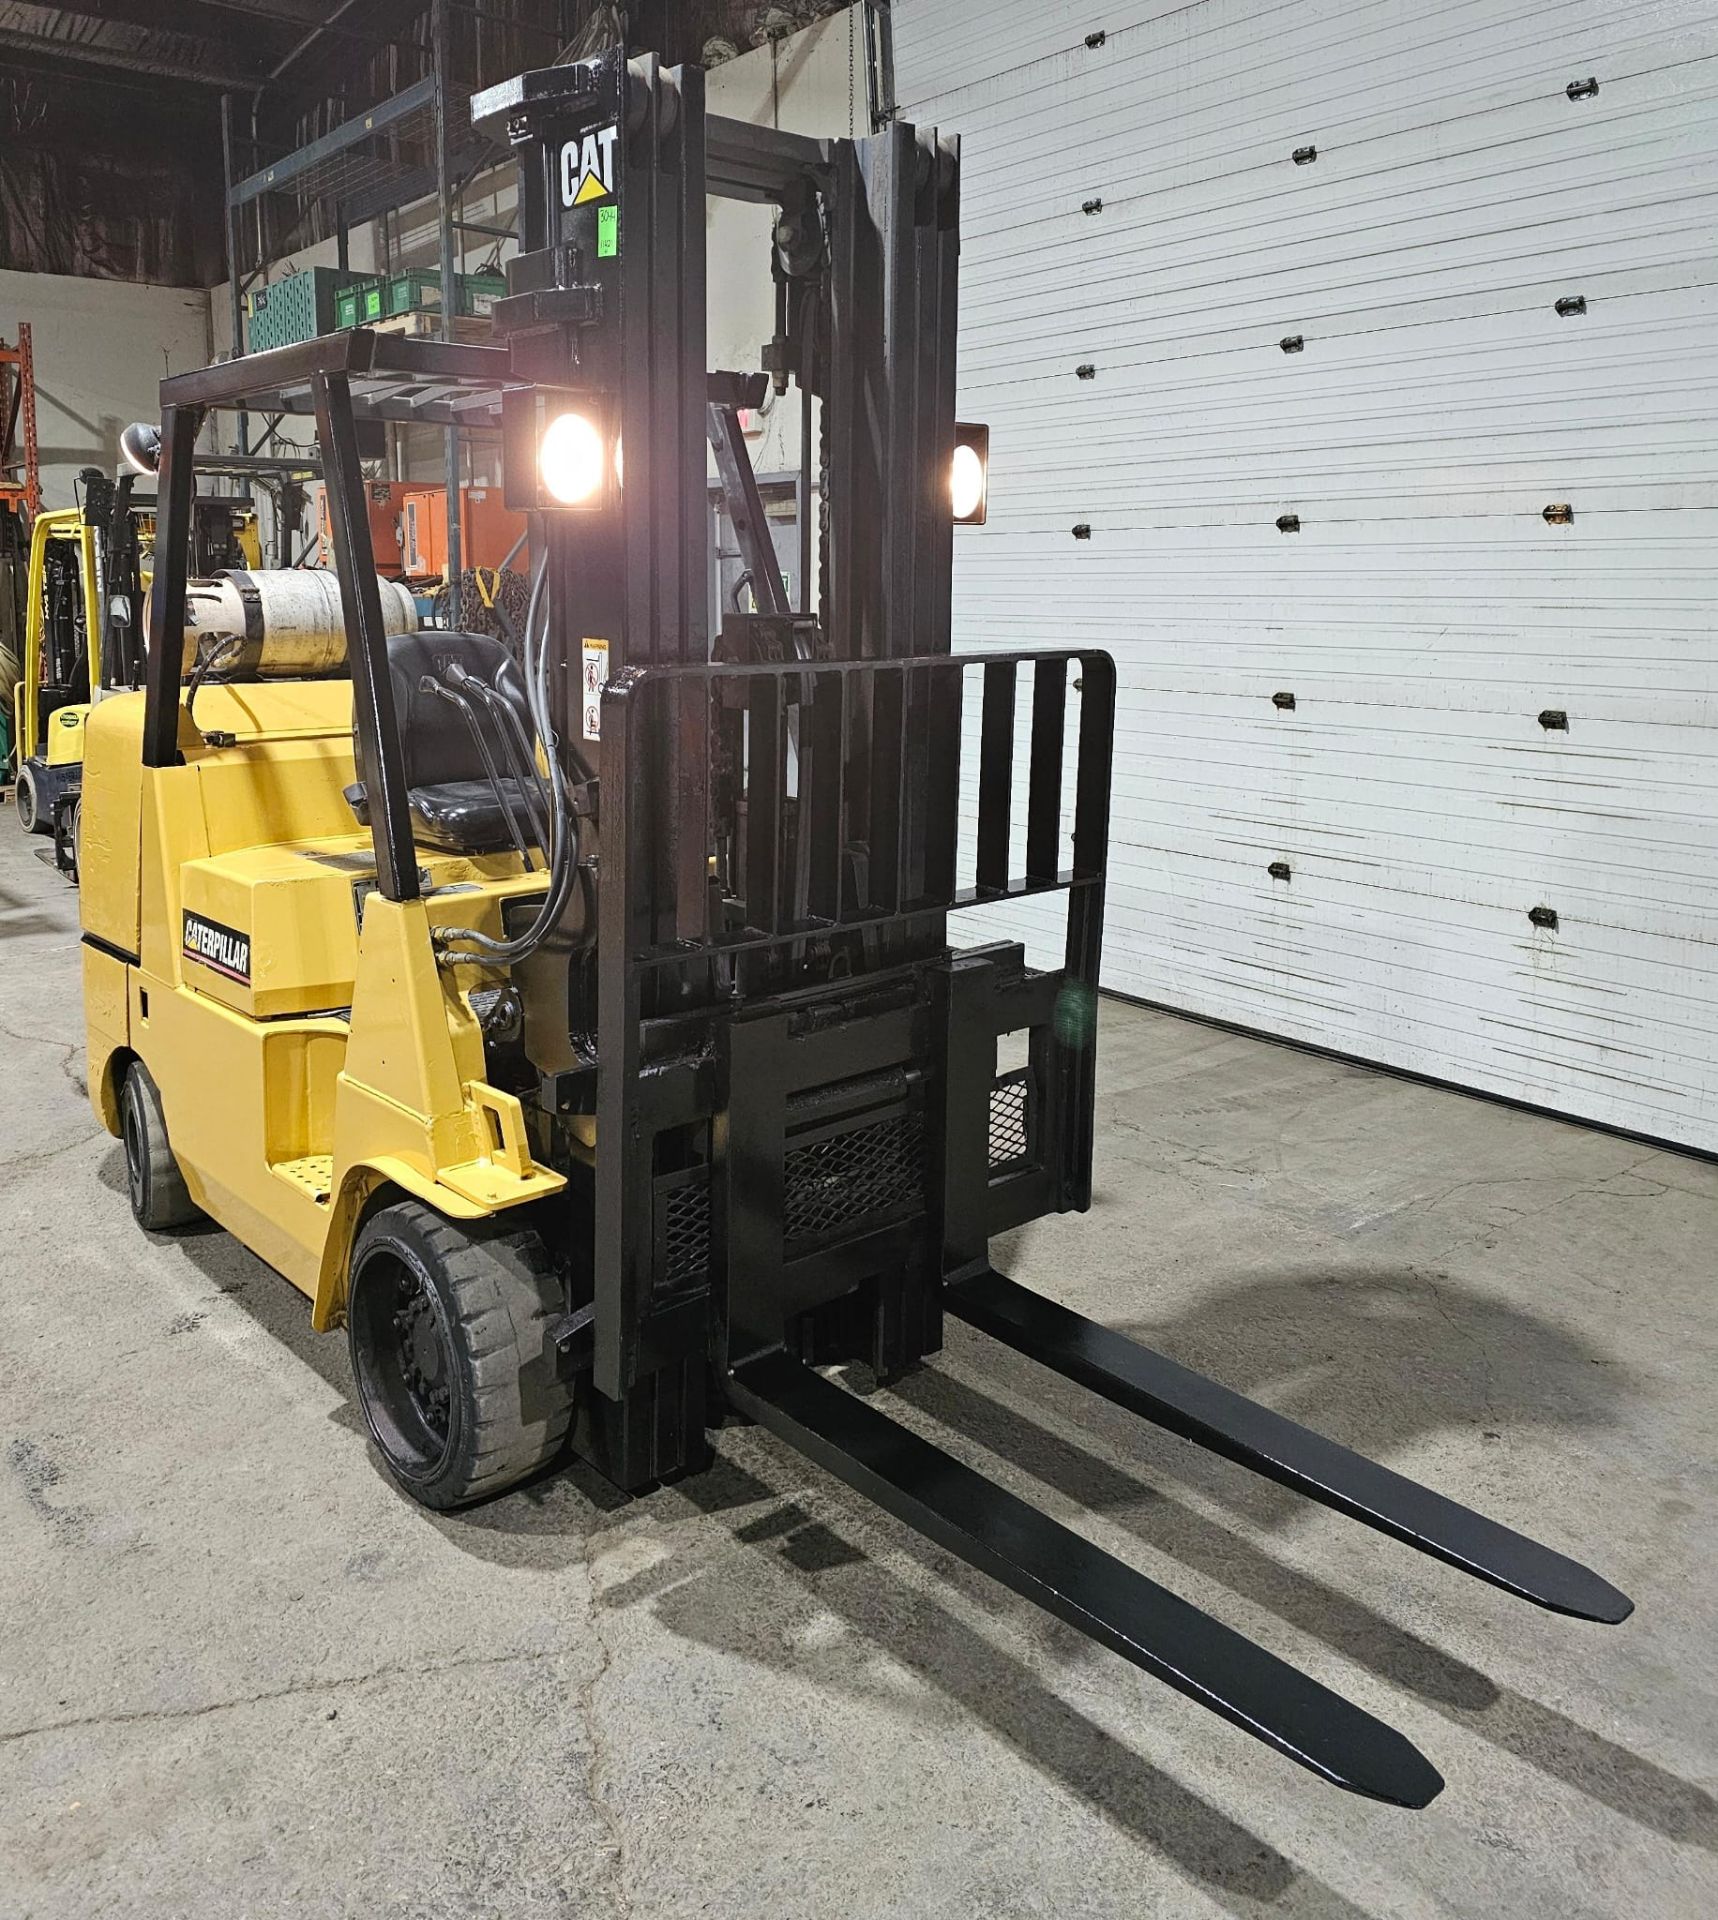 CAT 9,000lbs Capacity LPG (Propane) Forklift with sideshift & 3-STAGE MAST 209" load height - Image 4 of 5